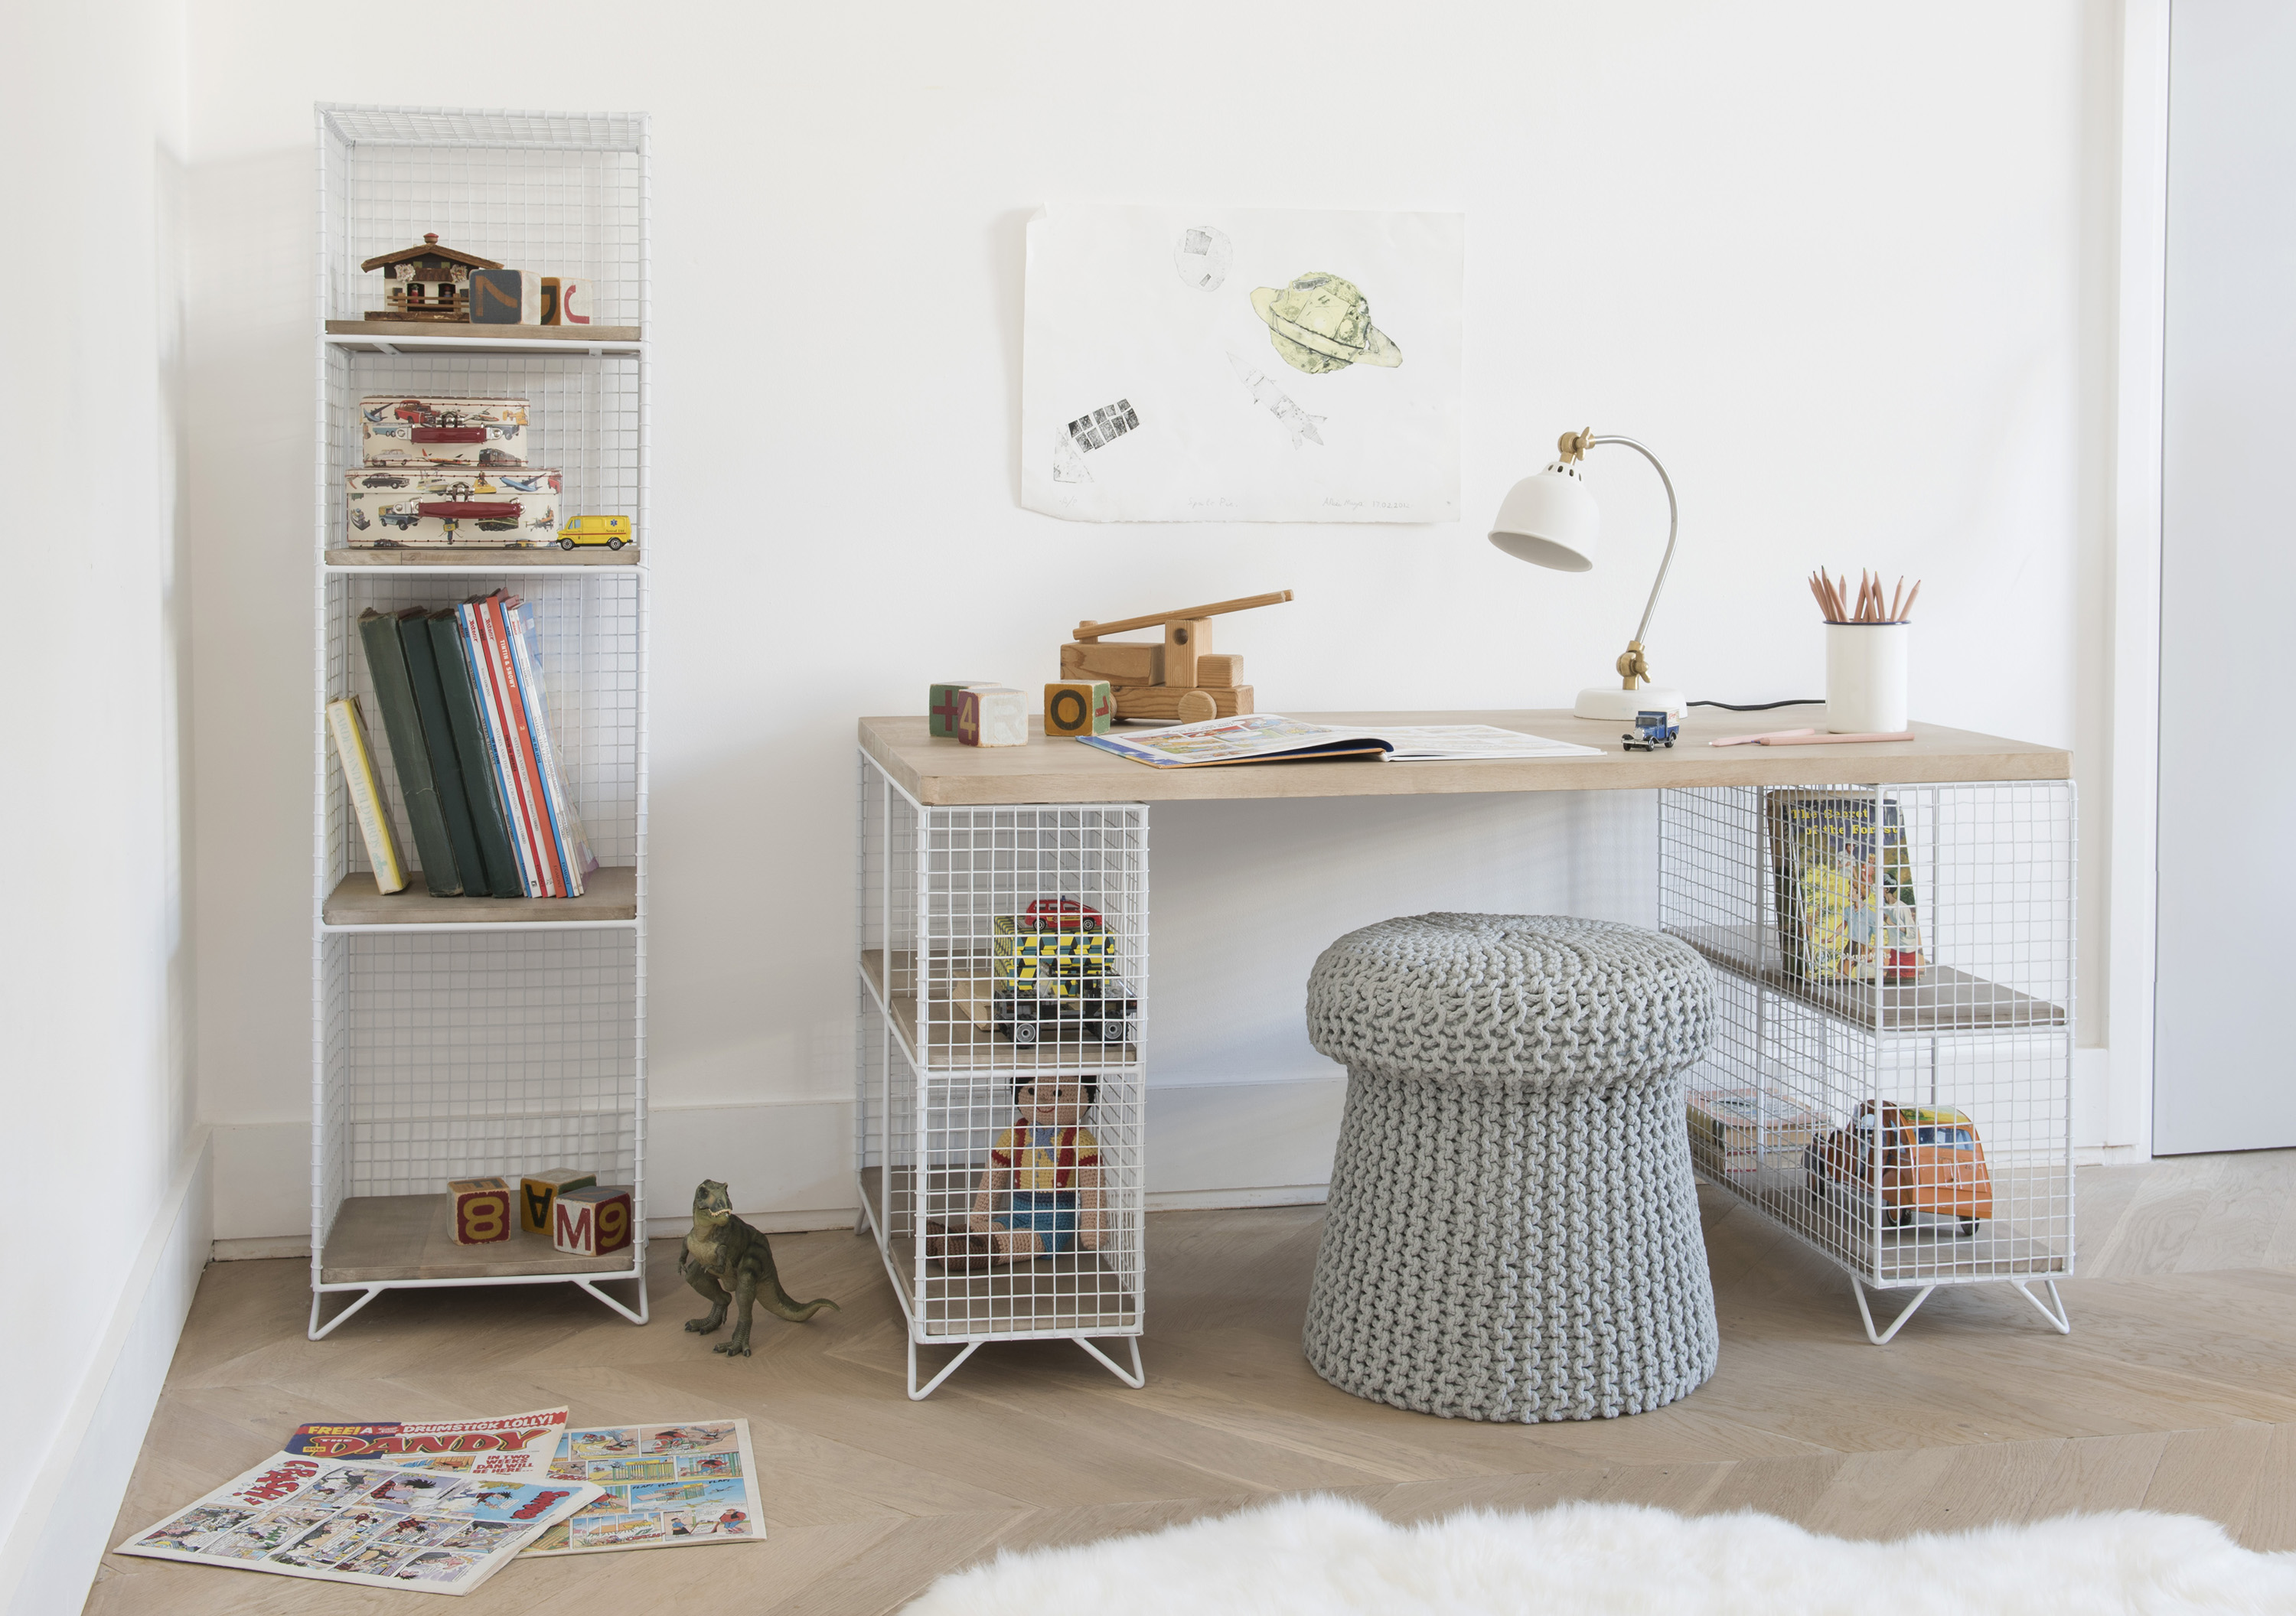 storage units for kids rooms